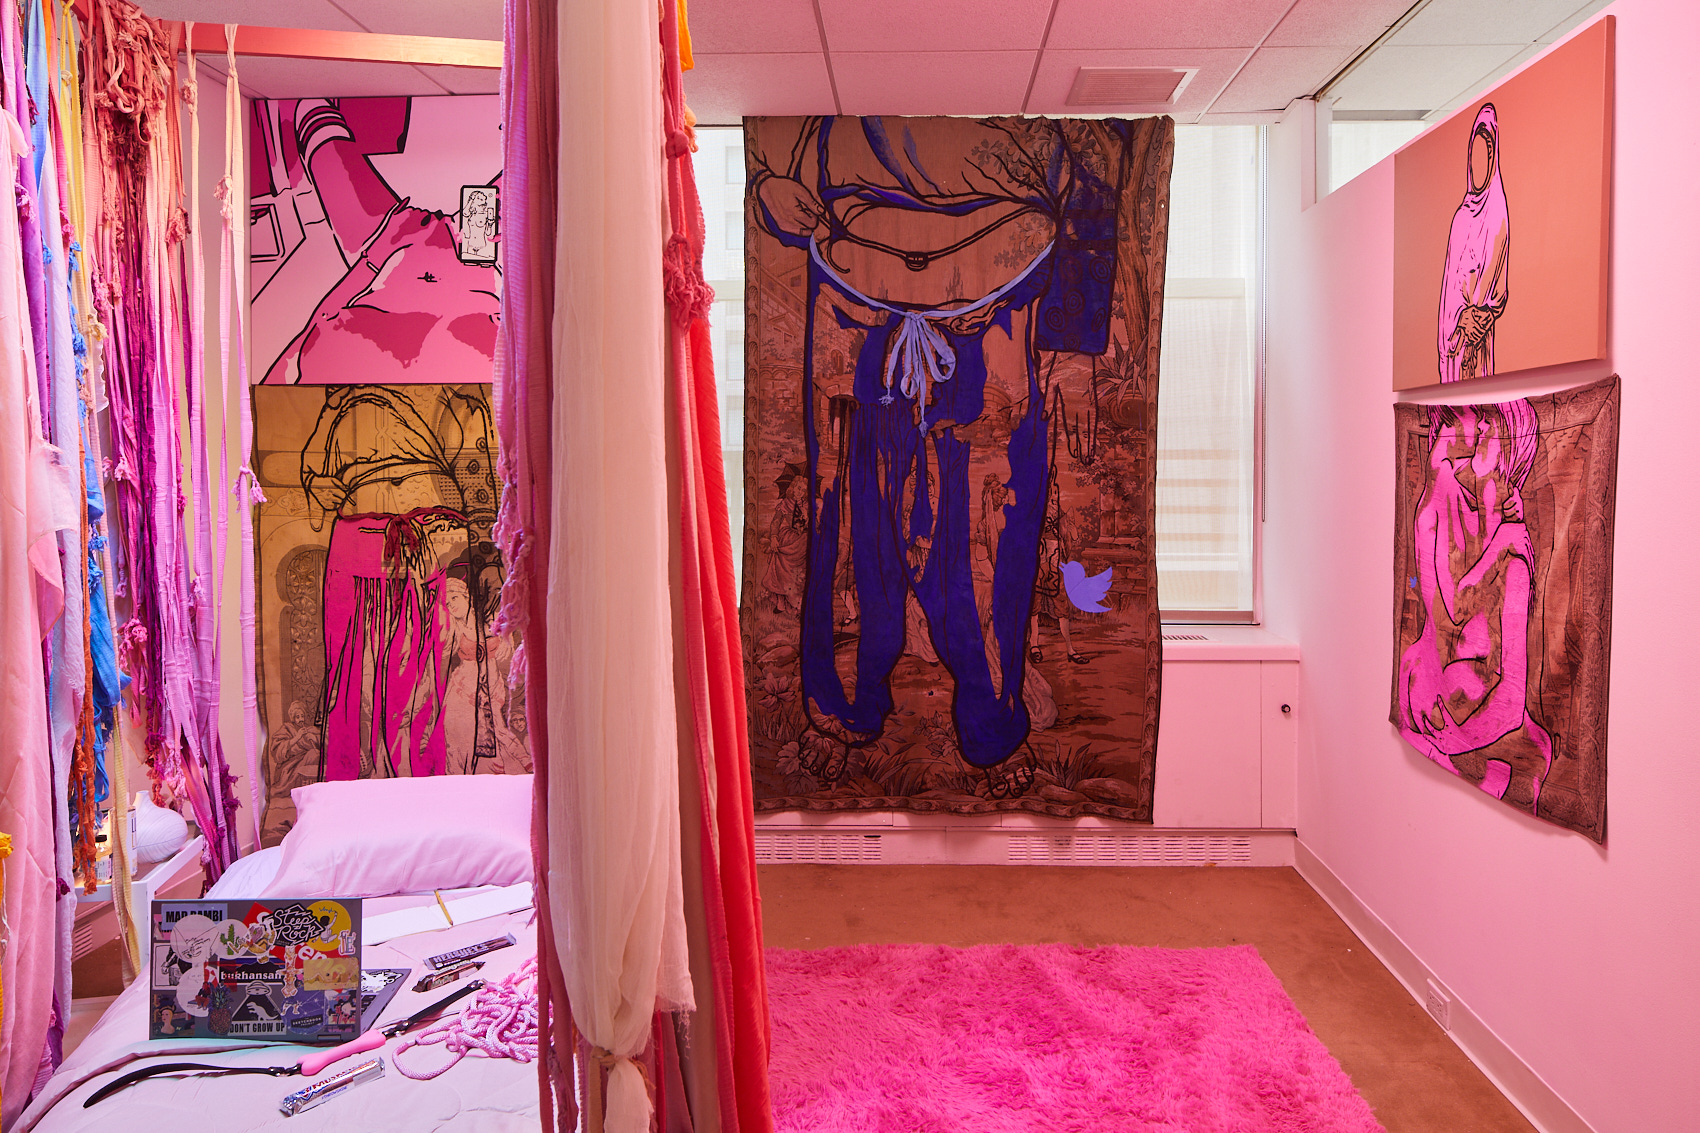 A bright pink room with large hanging images of nude and semi-nude people in erotic poses. Behind the hangings is a low ben with pink sheets, a laptop, and sex toys such as a whip, rope, and a vibrator.